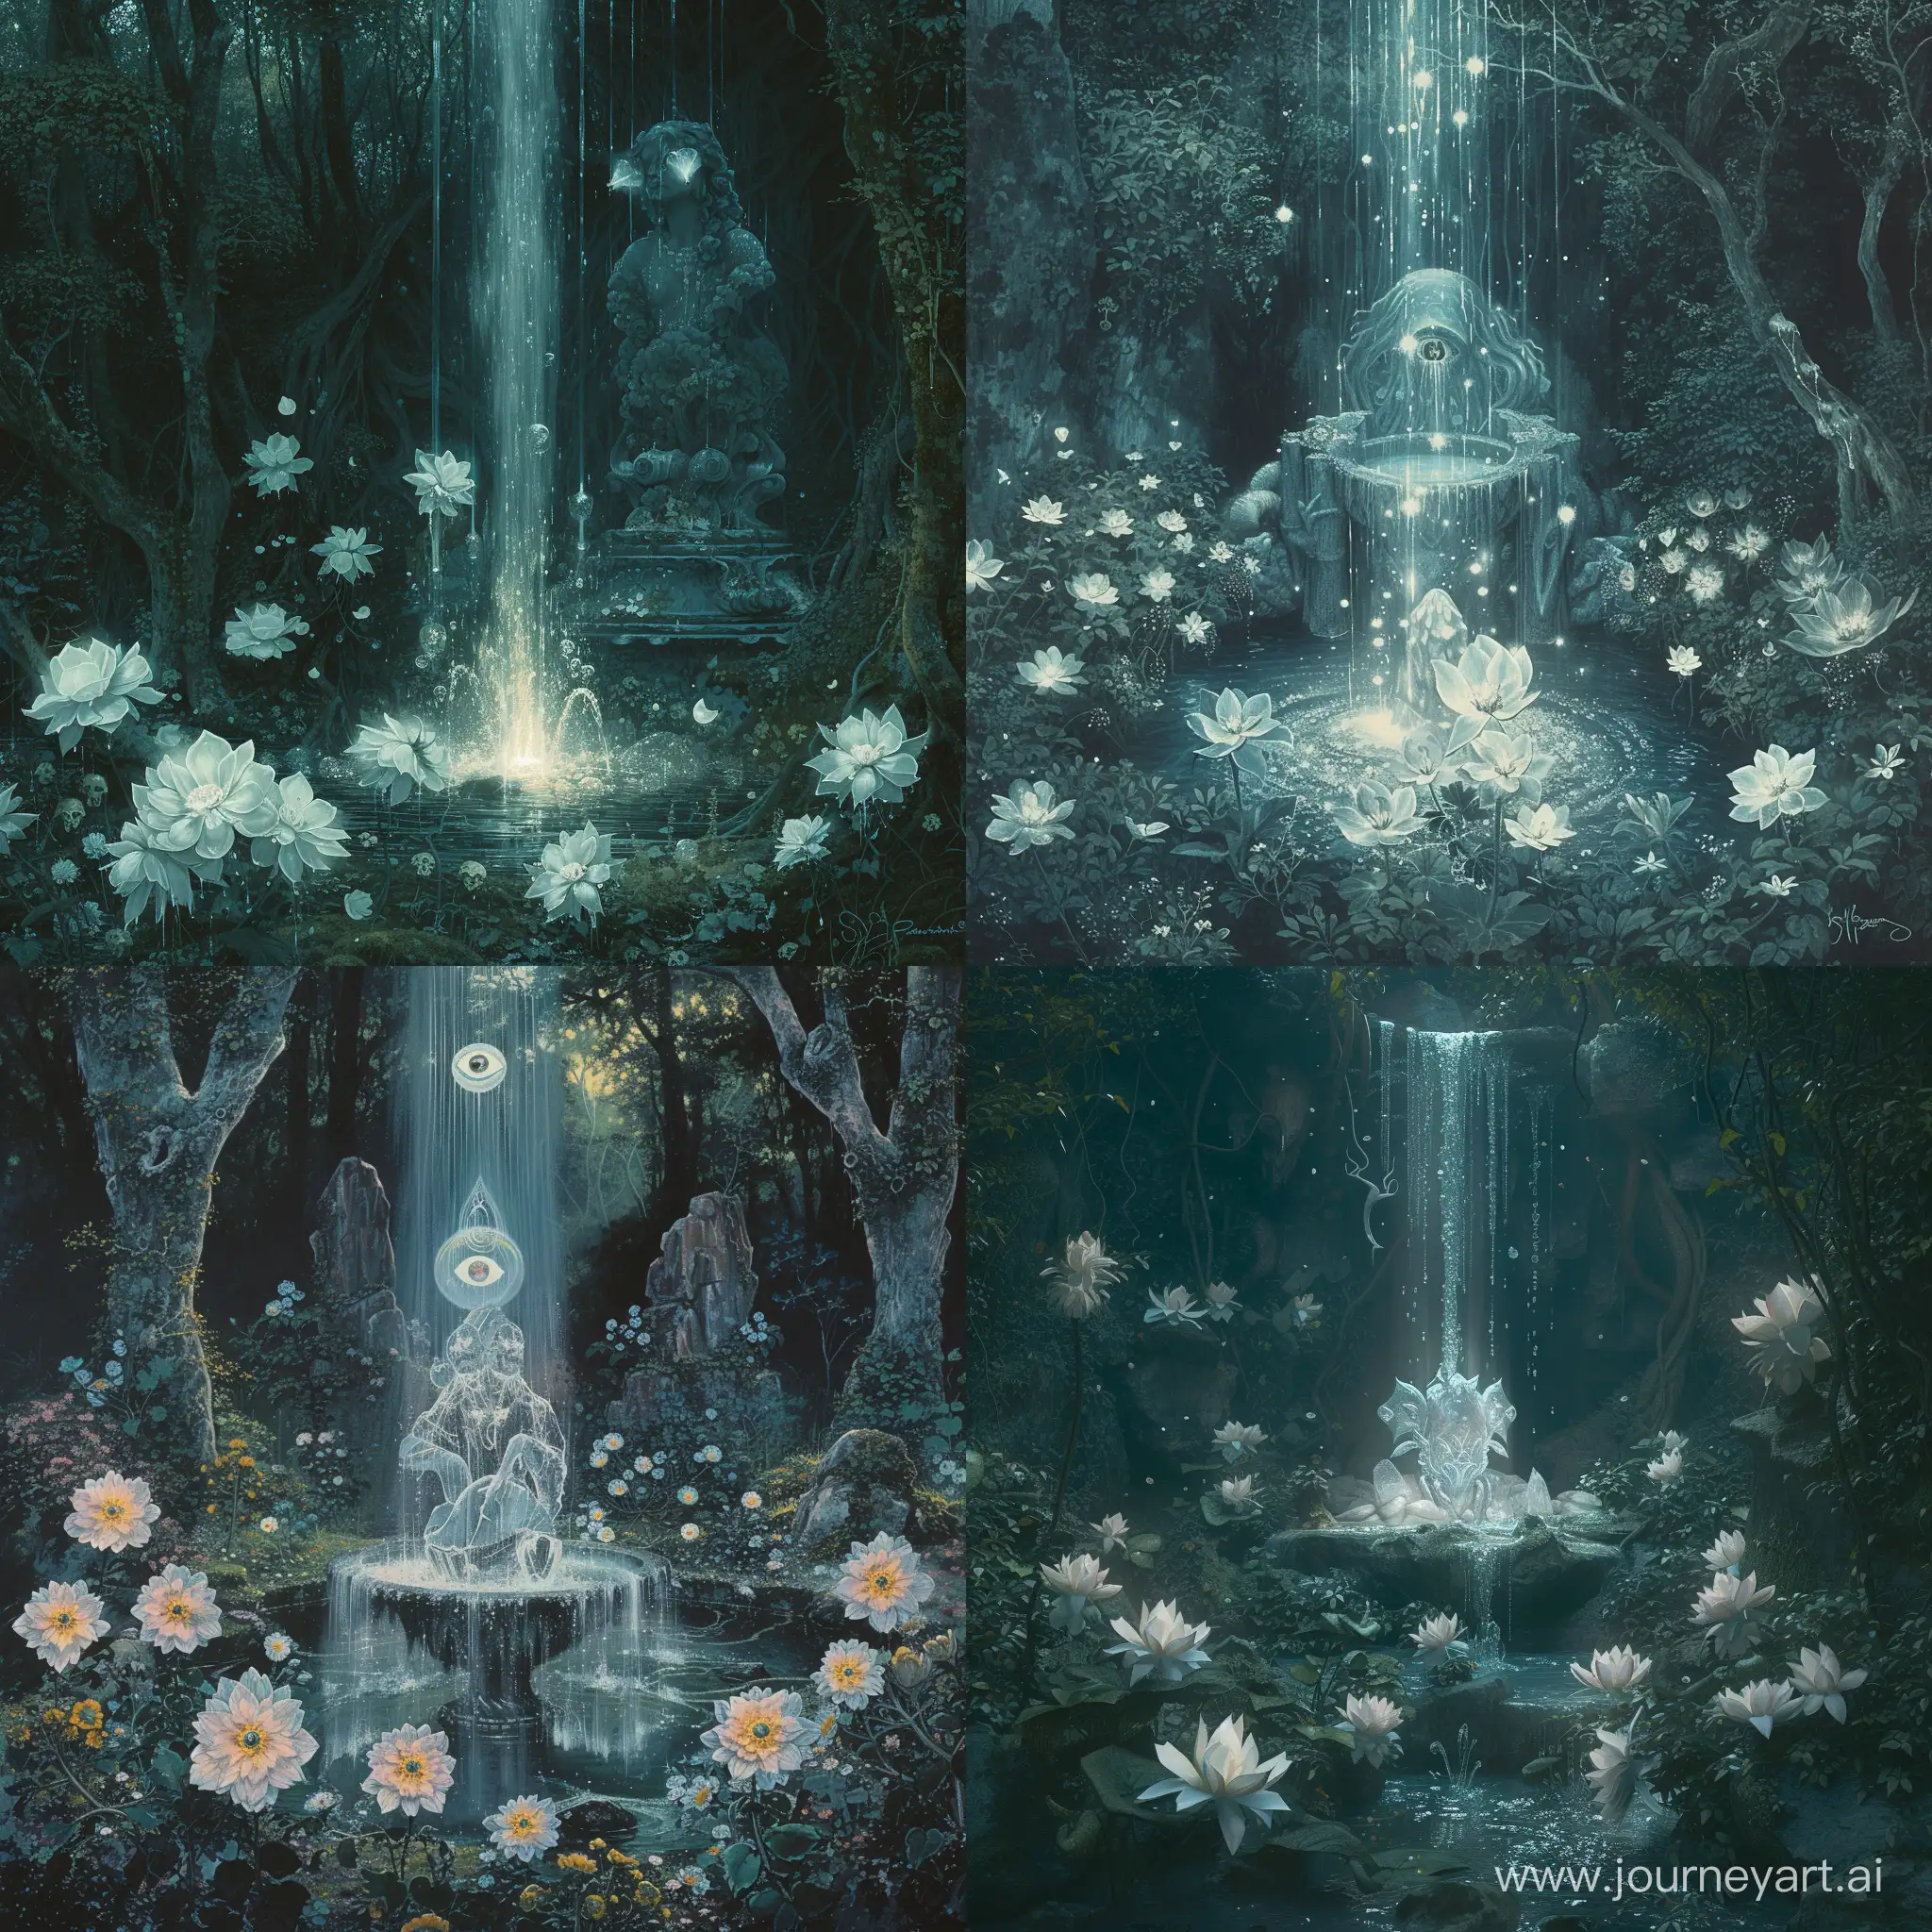 a fountain of immortality, Hidden within the heart of an ancient, overgrown forest, the fountain emanates a soft, ethereal glow, casting a perpetual twilight upon the sacred grove, Surrounding the fountain are blooming celestial flowers with petals that shimmer like liquid silver, The waters of the fountain cascade from a crystalline statue depicting an otherworldly being, its eyes holding the secrets of eternal life,1970's dark fantasy style, gritty,  vintage, detailed